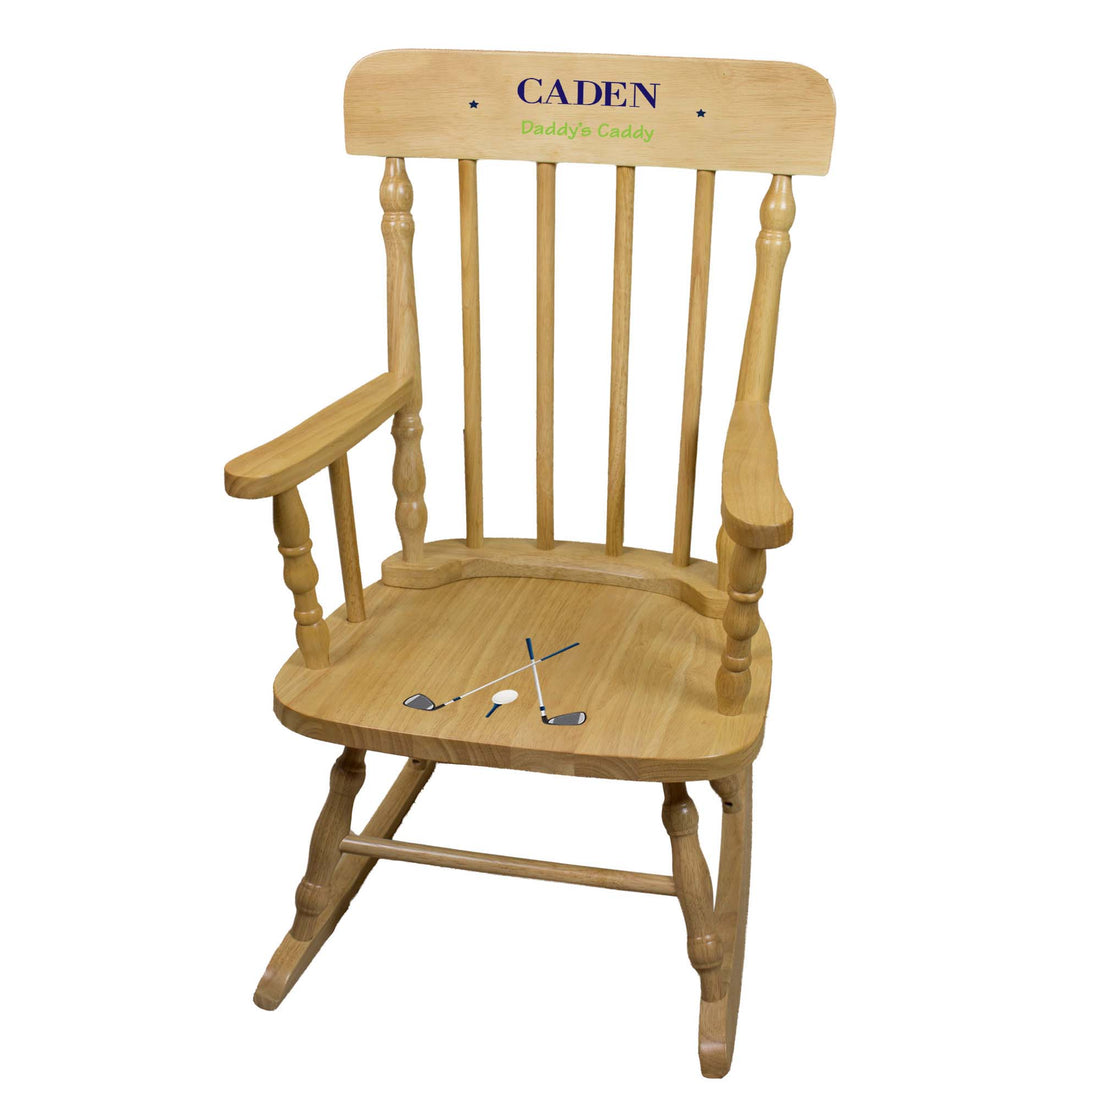 Golf Natural Spindle Rocking Chair